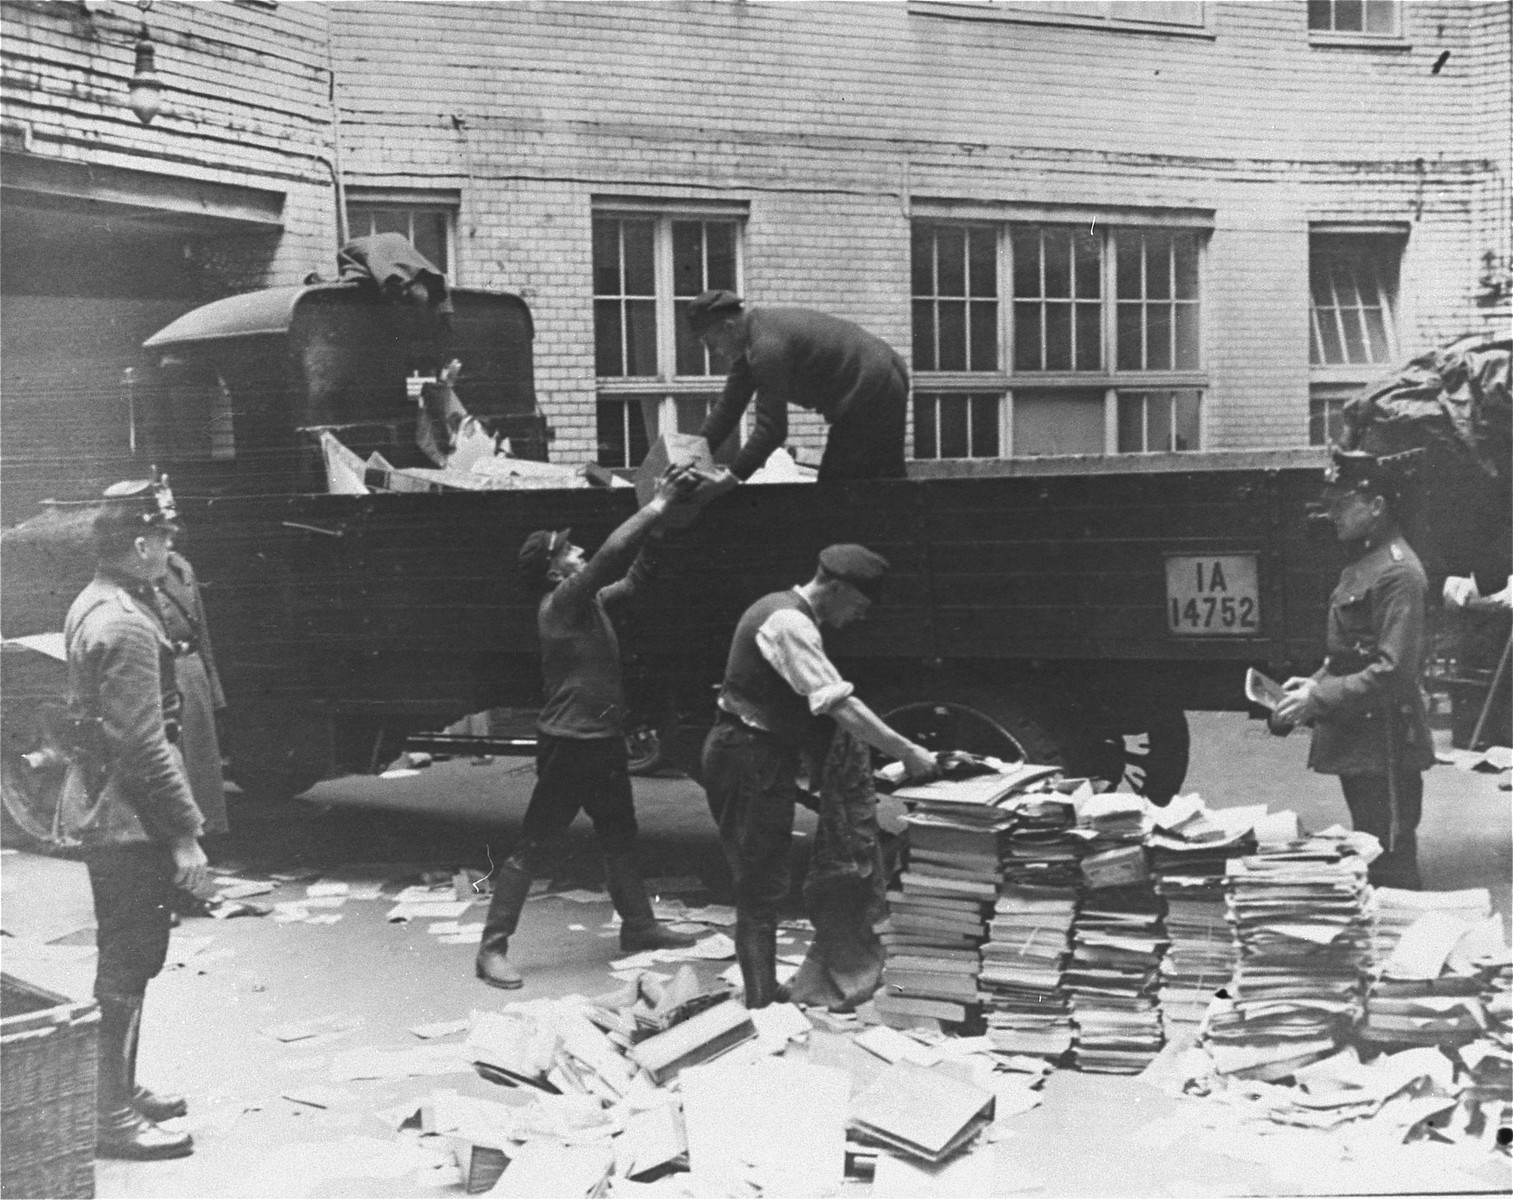 Civilians load Communist publications onto the back of a truck as police look on during a raid of the Karl-Liebknecht House (KPD headquarters), which was on the Buelowplatz in Berlin.  

The closing of Communist Party offices was declared necessary for the protection of the state in the Enabling Act, passed by the Reichstag soon after the fire of 28 February 1933.